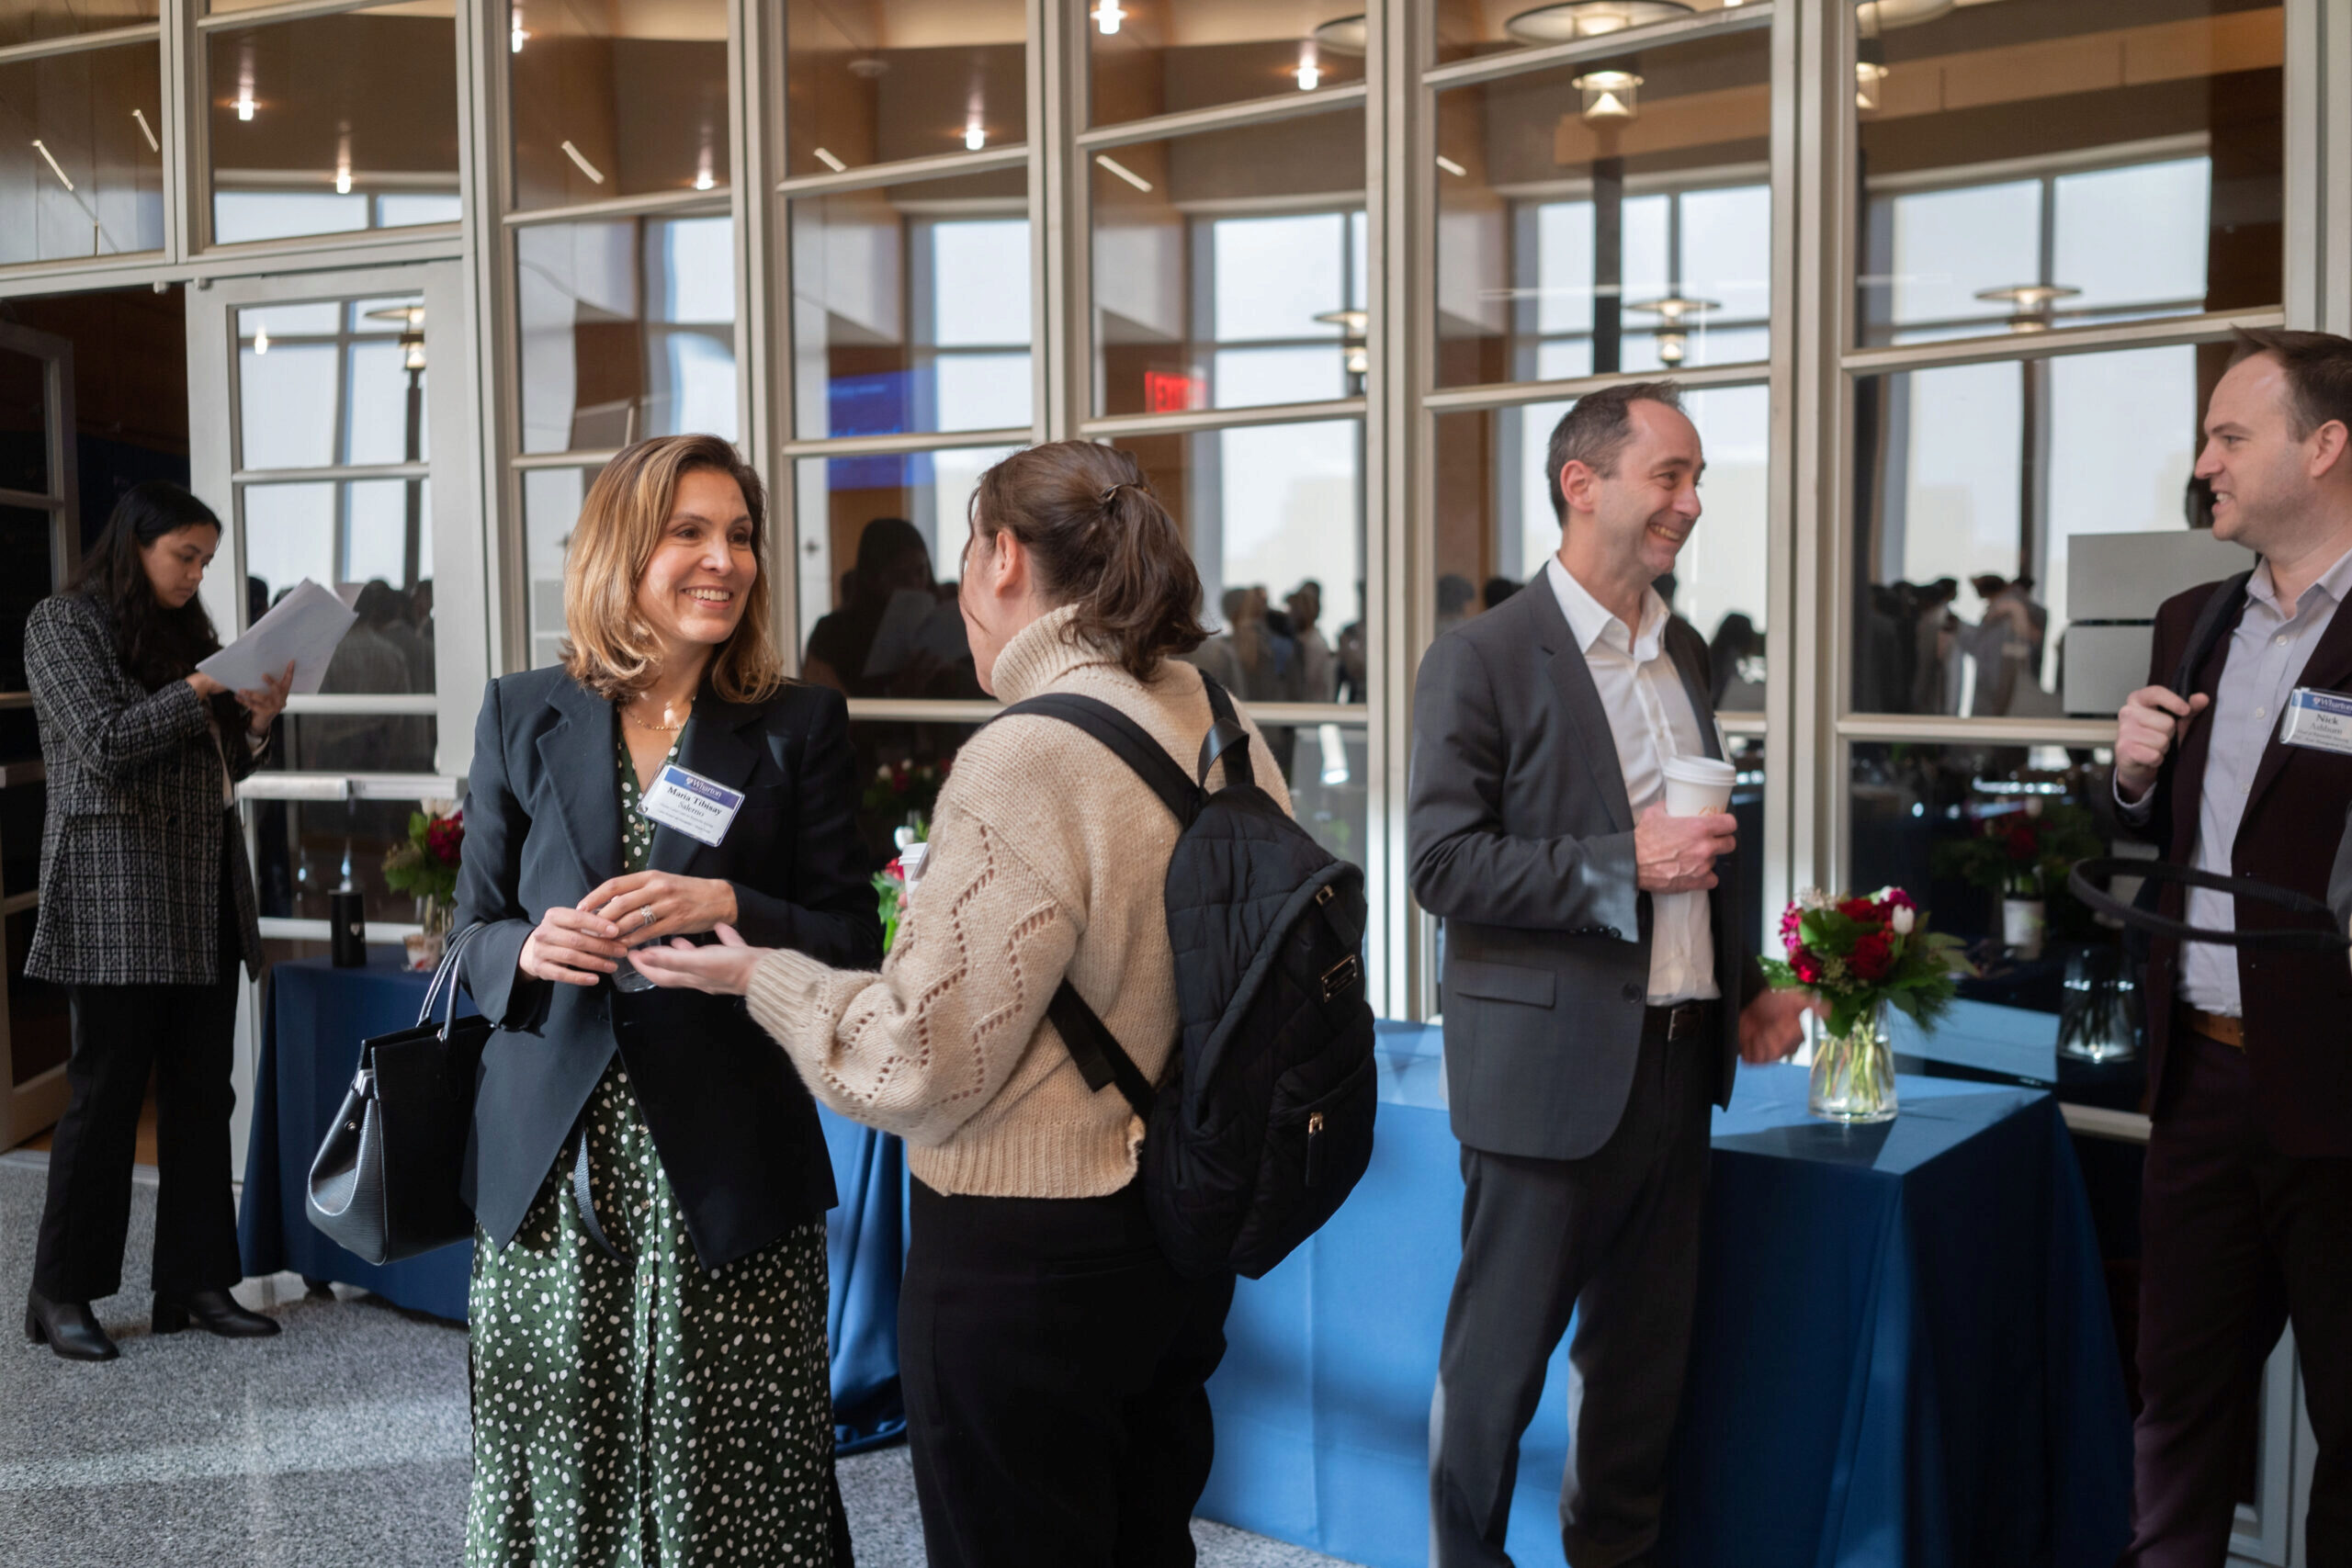 People in business attire networking at the breakfast reception in a bright room with blue tablecloths